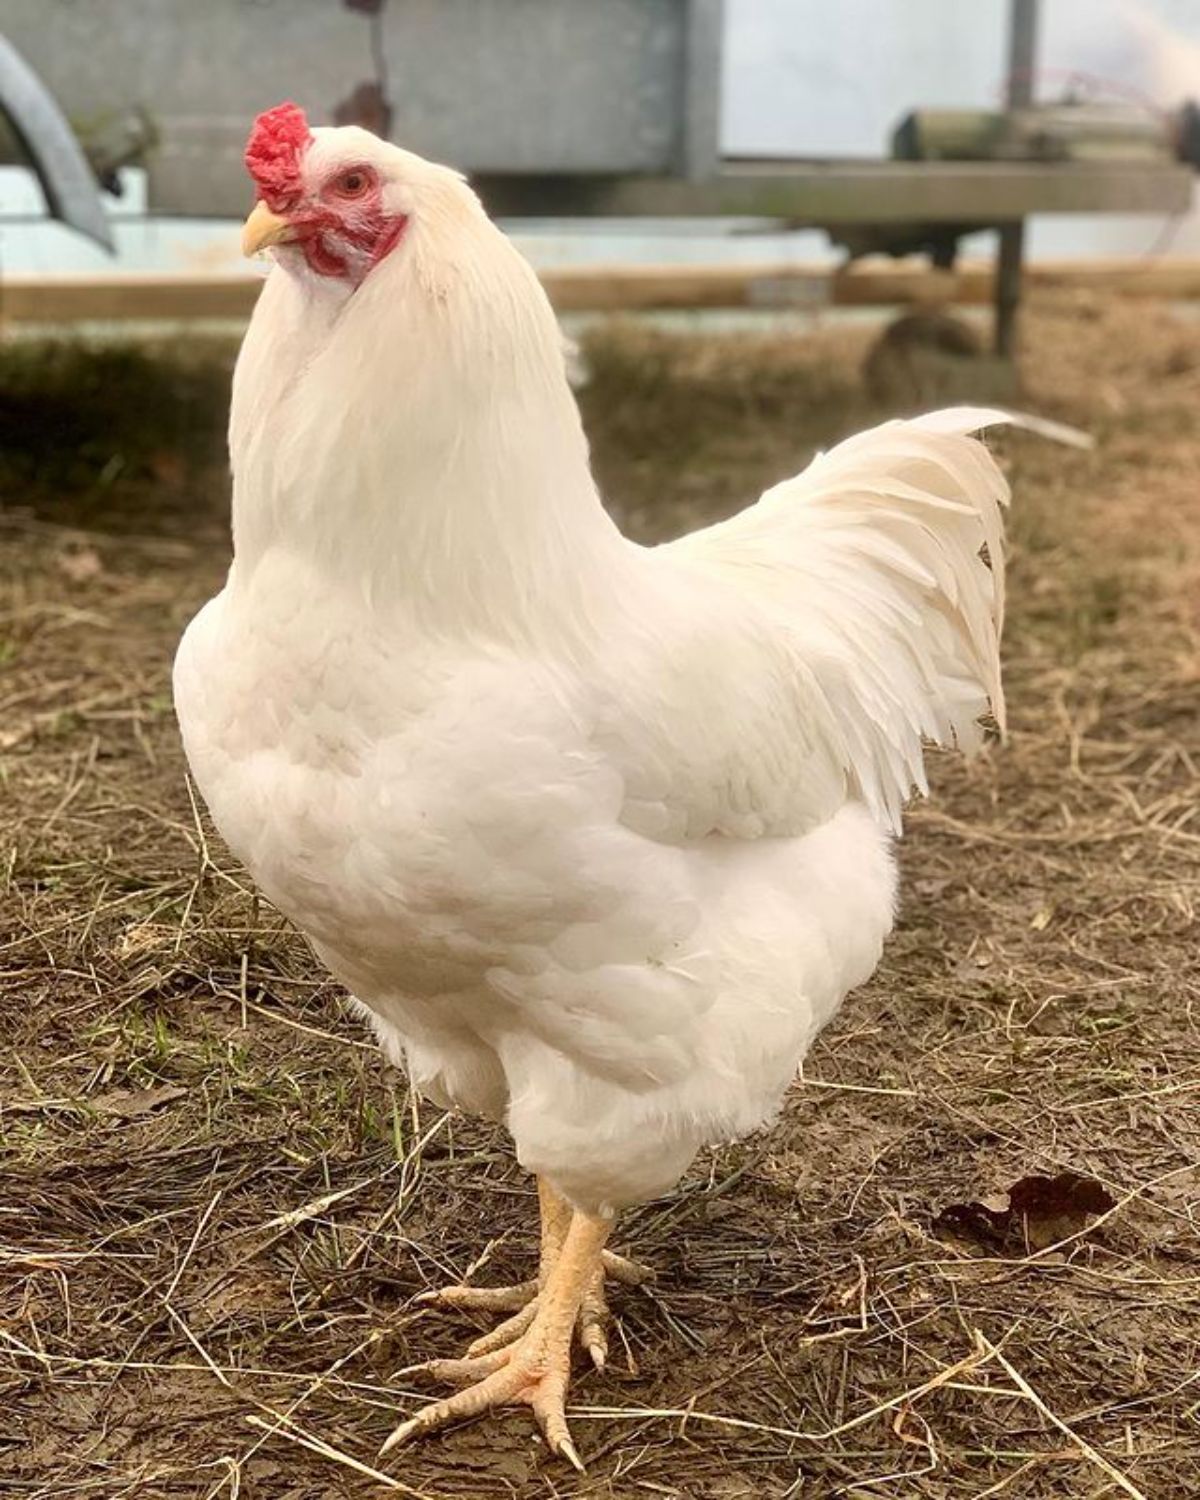 A big tall Ixworth rooster in a backyard.